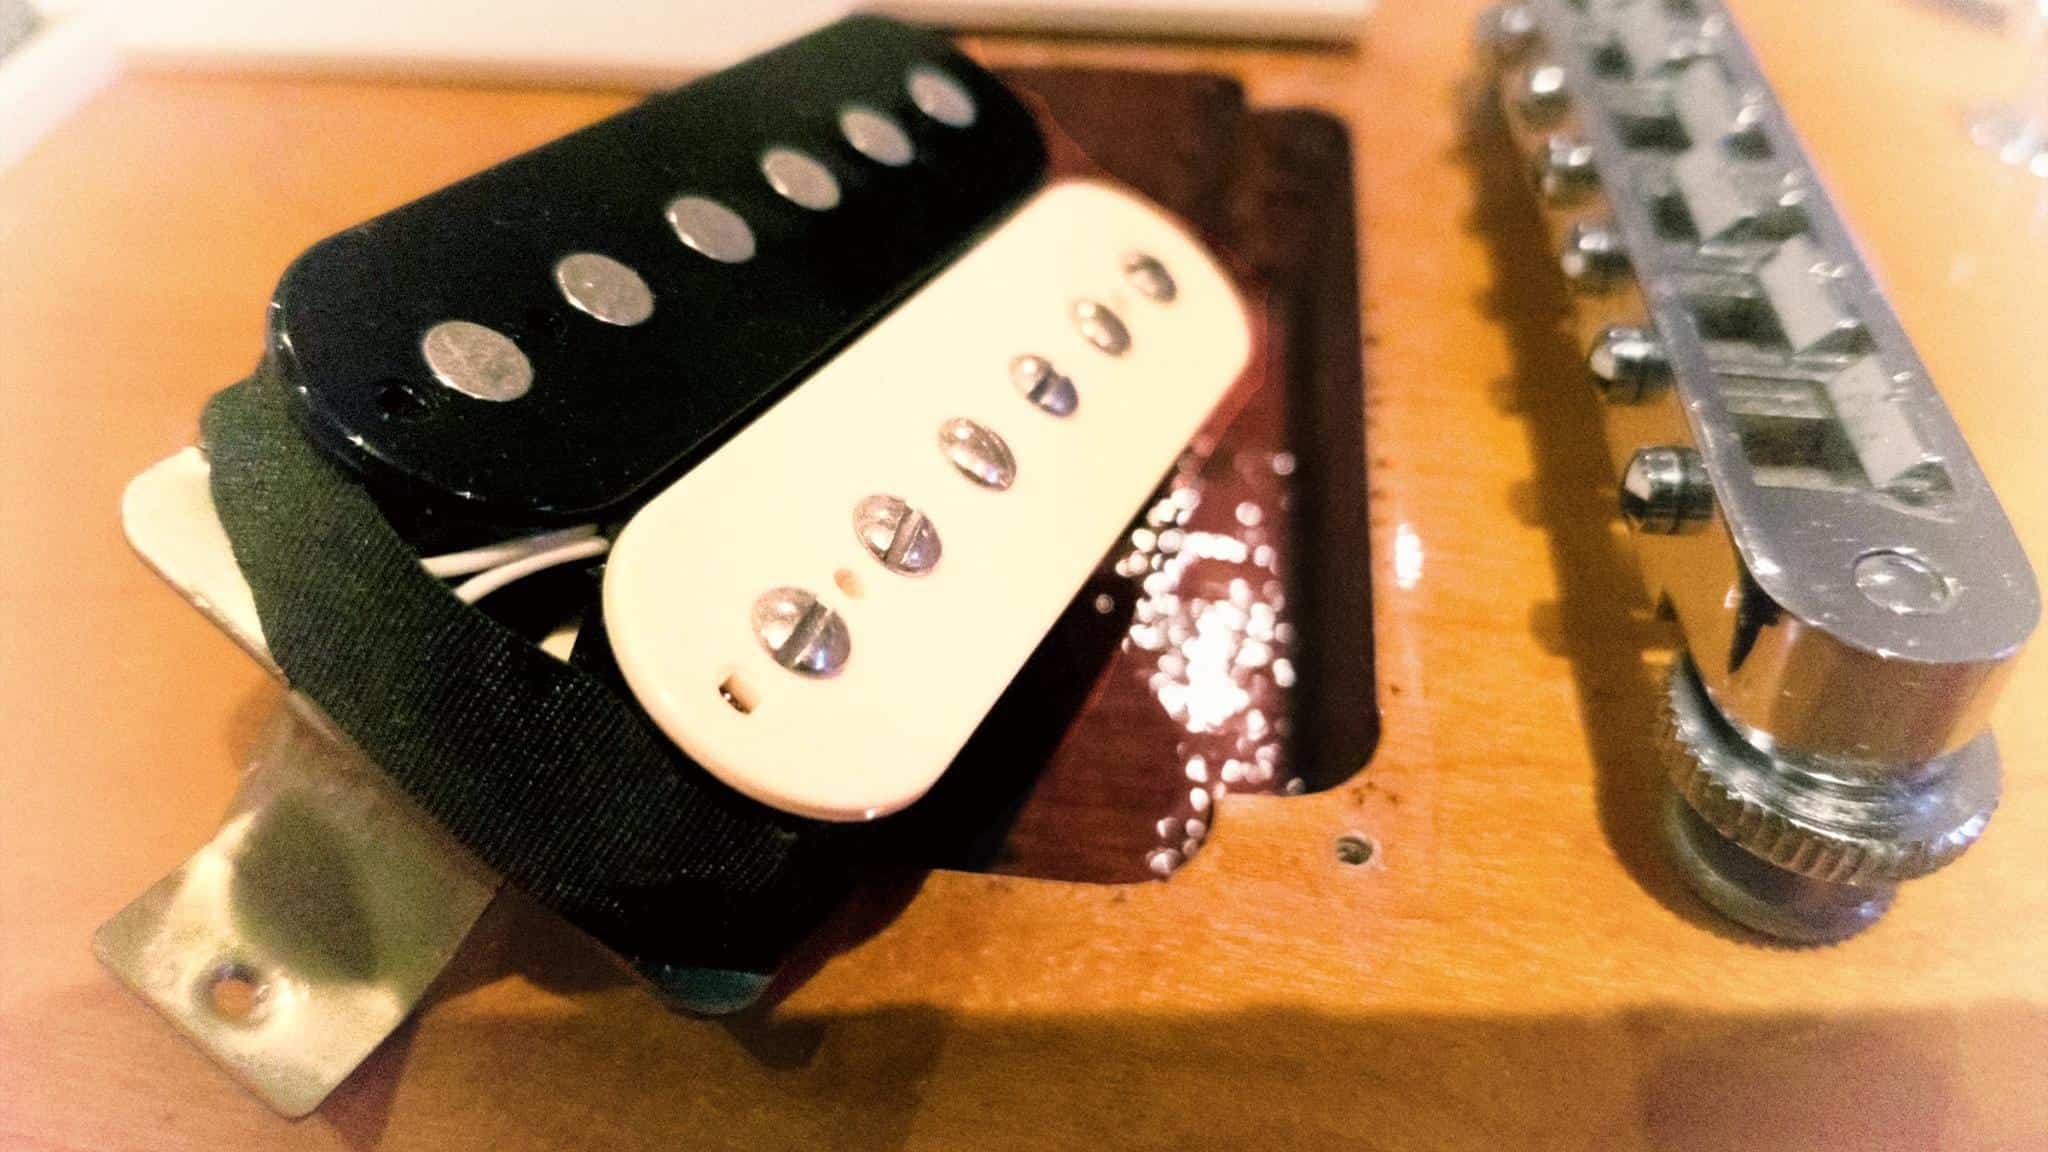 Humbucker pickup getting fitted into a guitar